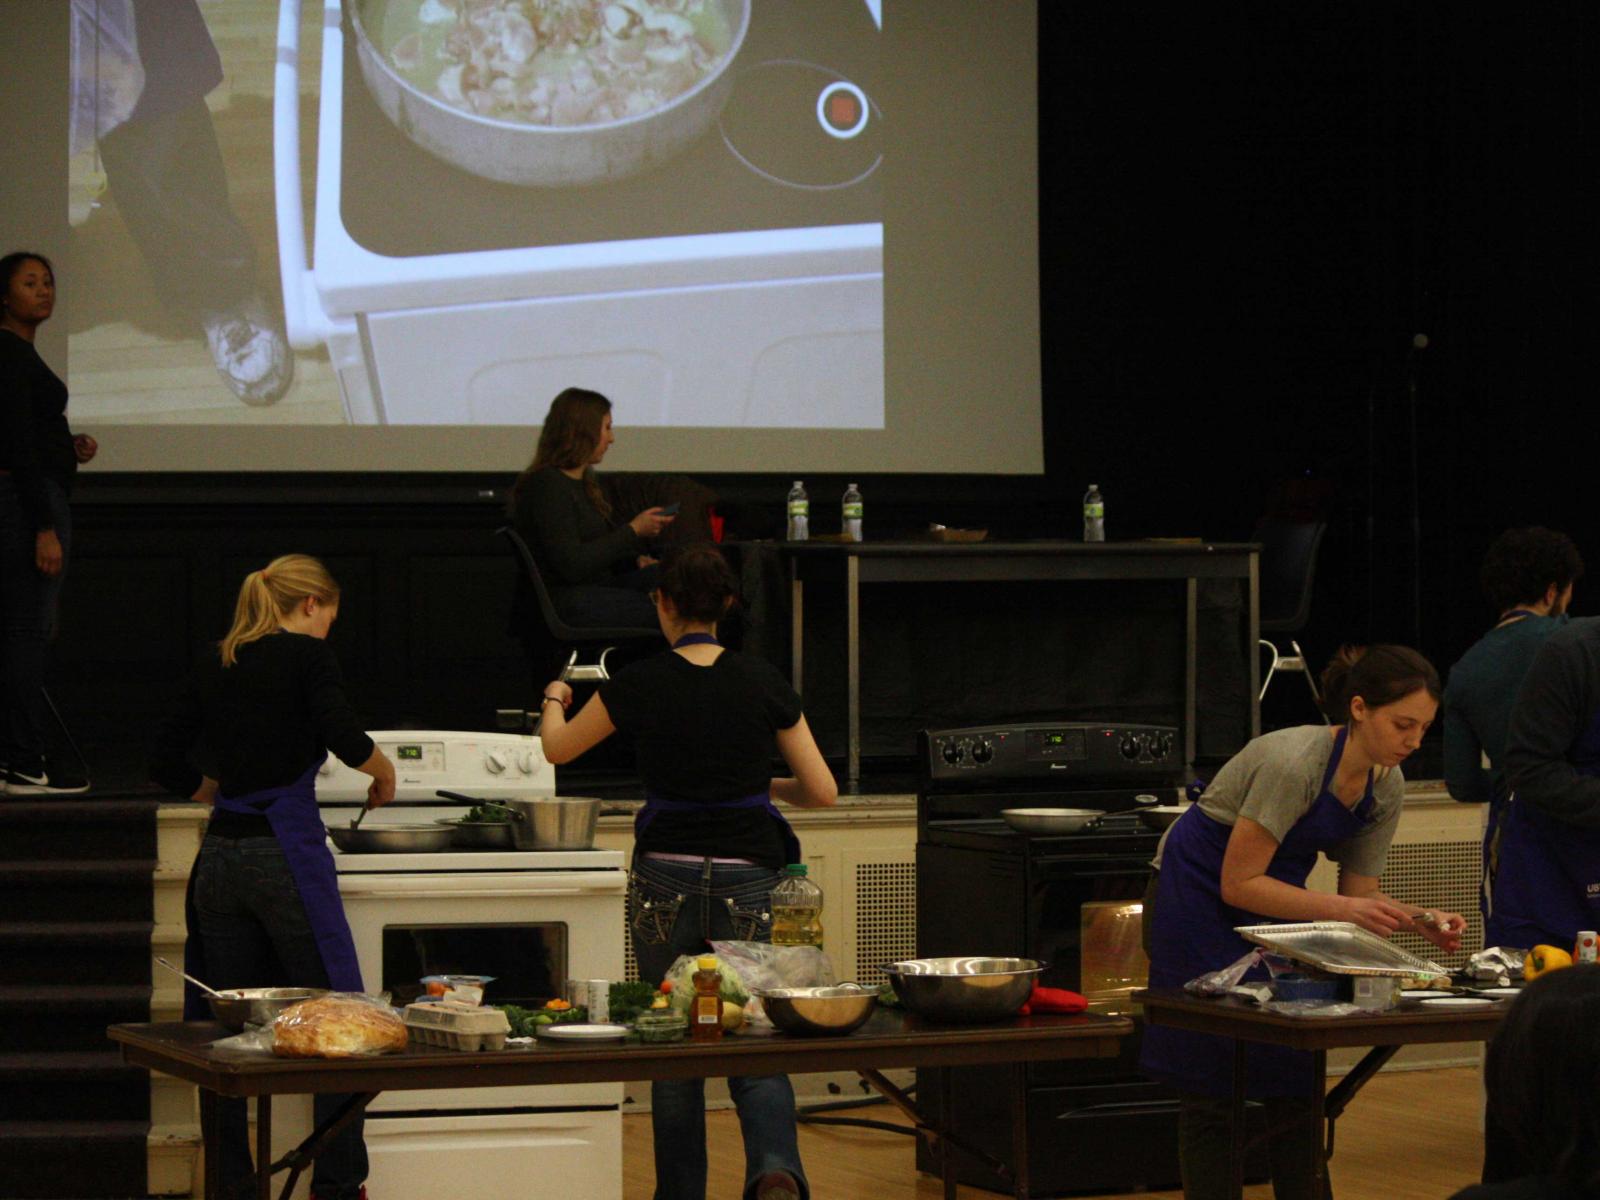 Overview of cooking competition